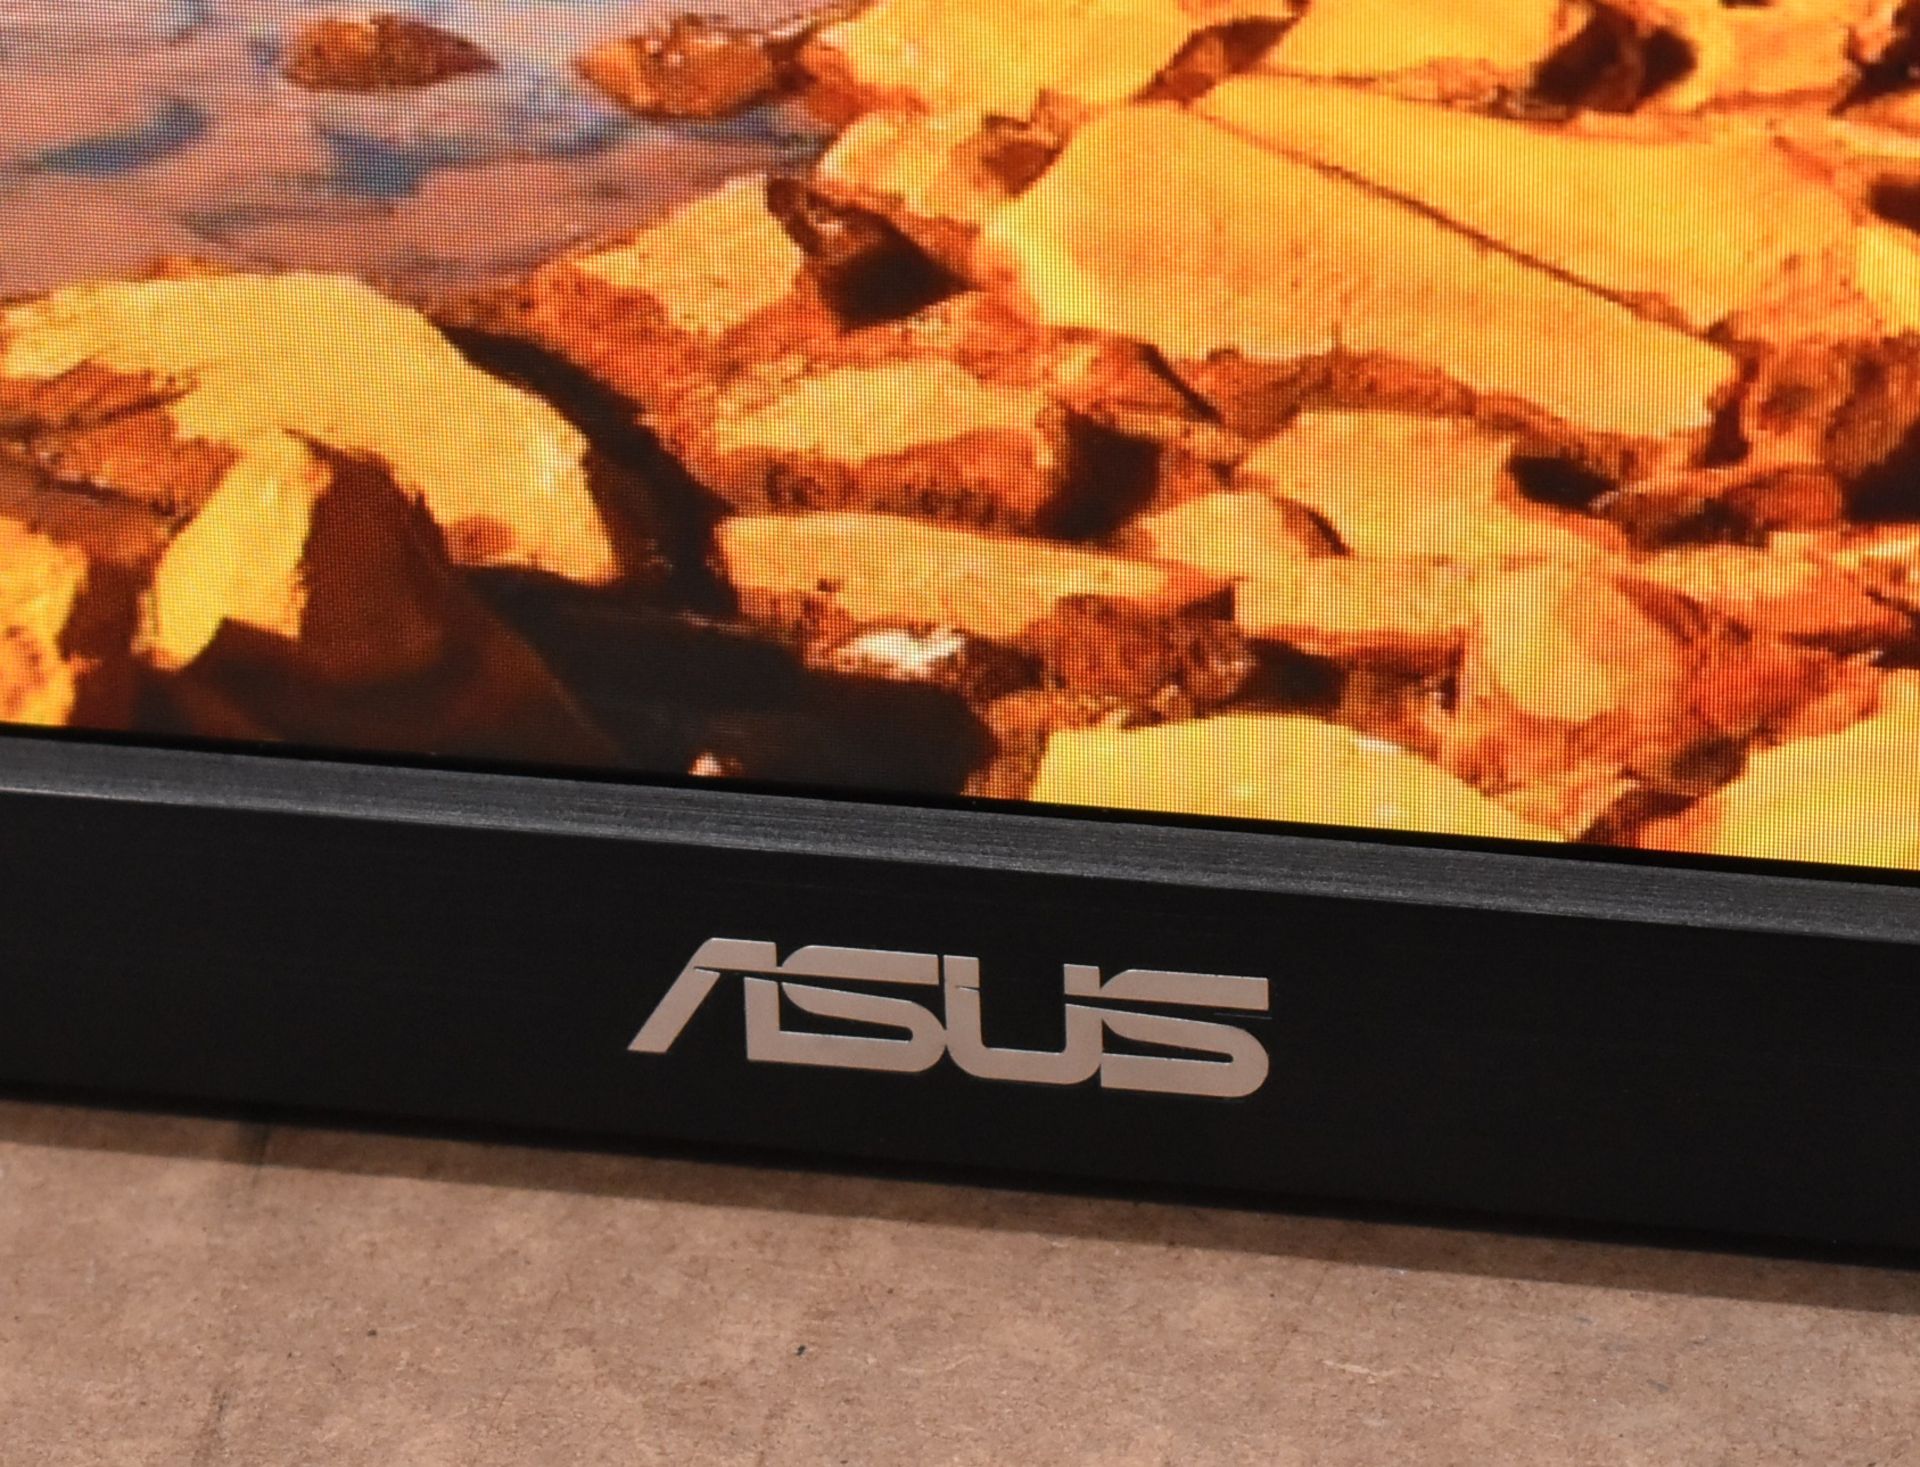 1 x Asus 23 Inch FHD Monitor - 1920 x 1080 Resolution - Model VC239 - Ref: MPC215 CA - CL678 - - Image 3 of 7